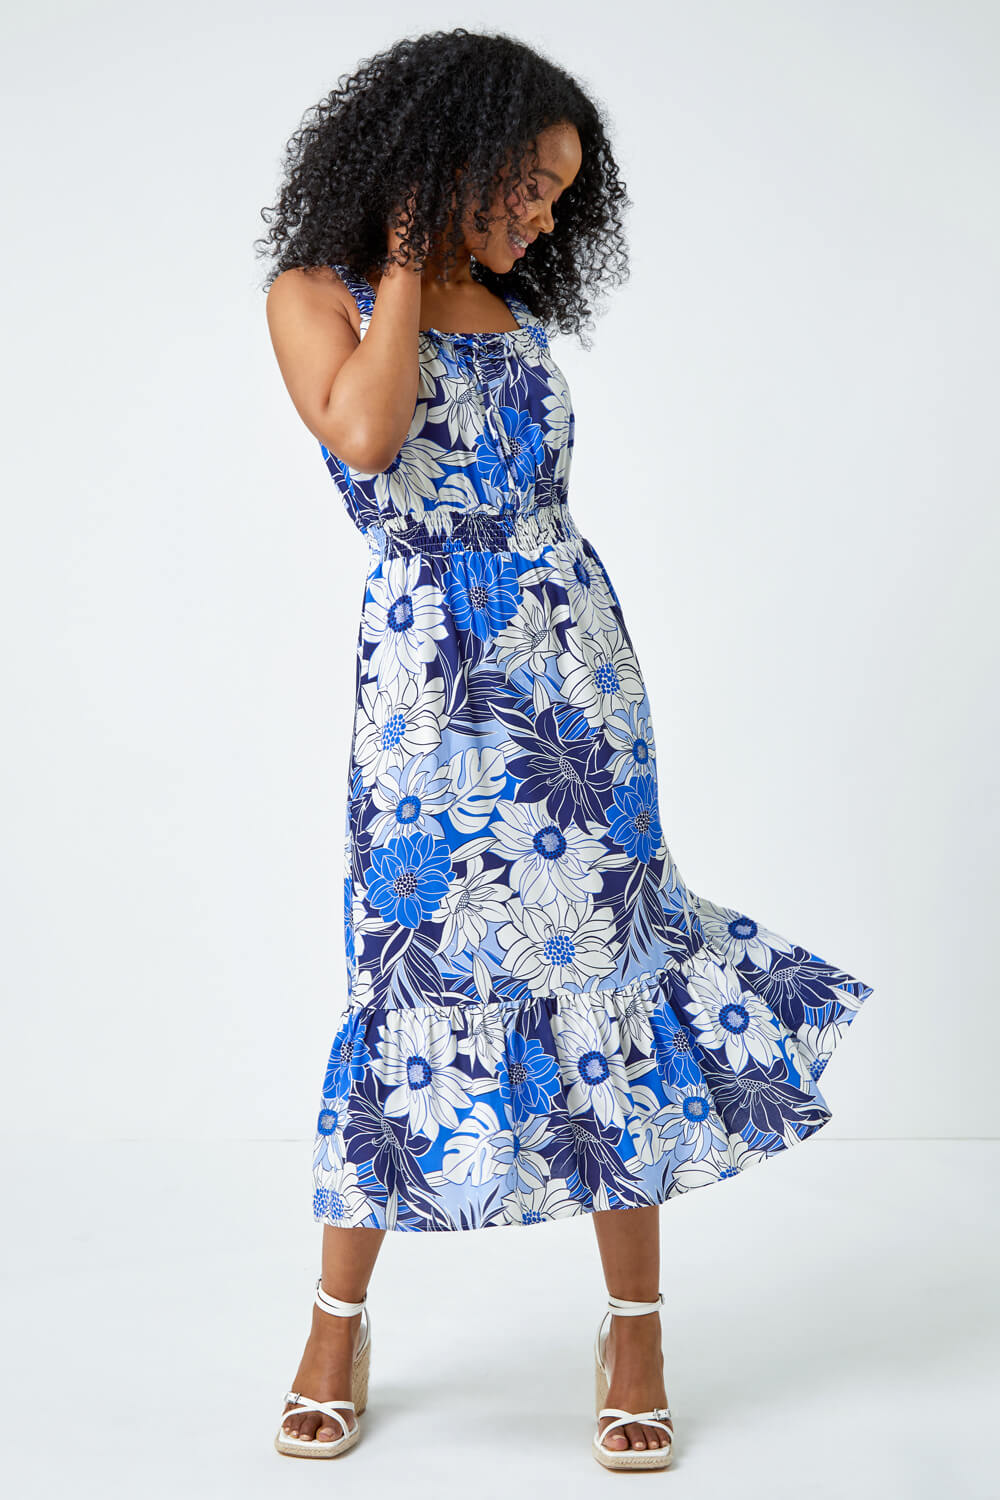 Blue Petite Floral Print Tiered Sundress, Image 2 of 5